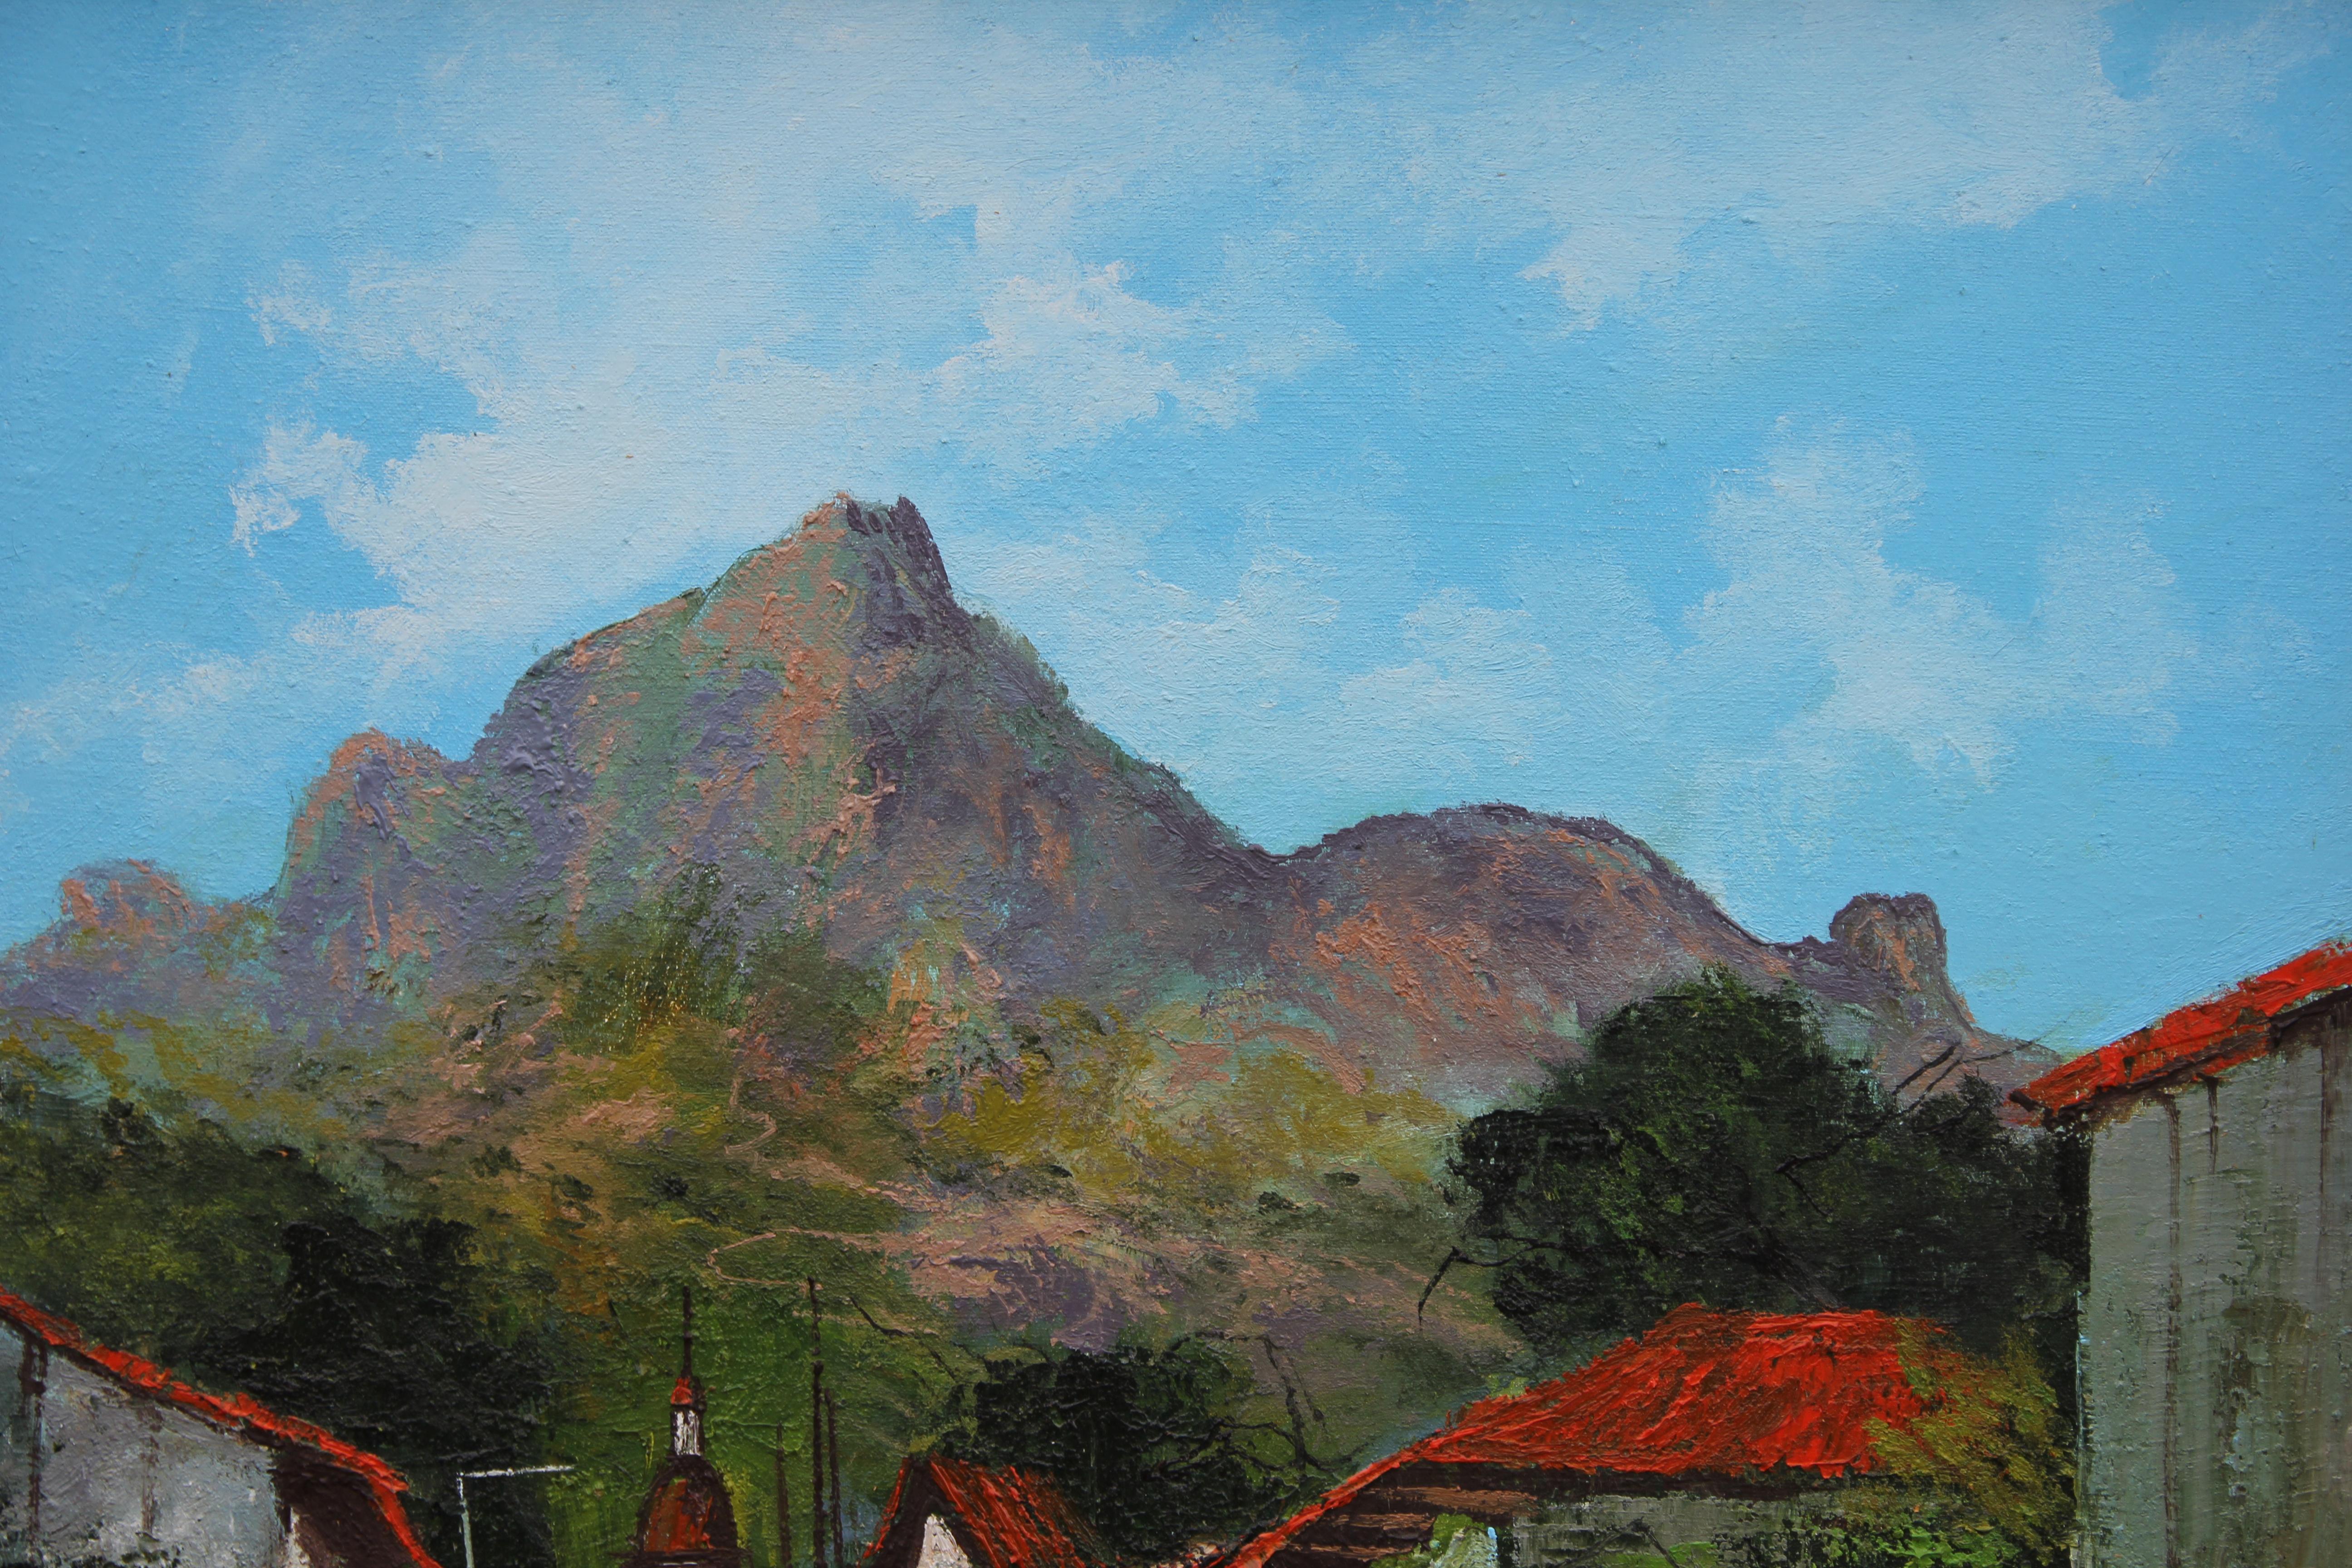 Landscape View of a South American Town - Black Landscape Painting by Unknown